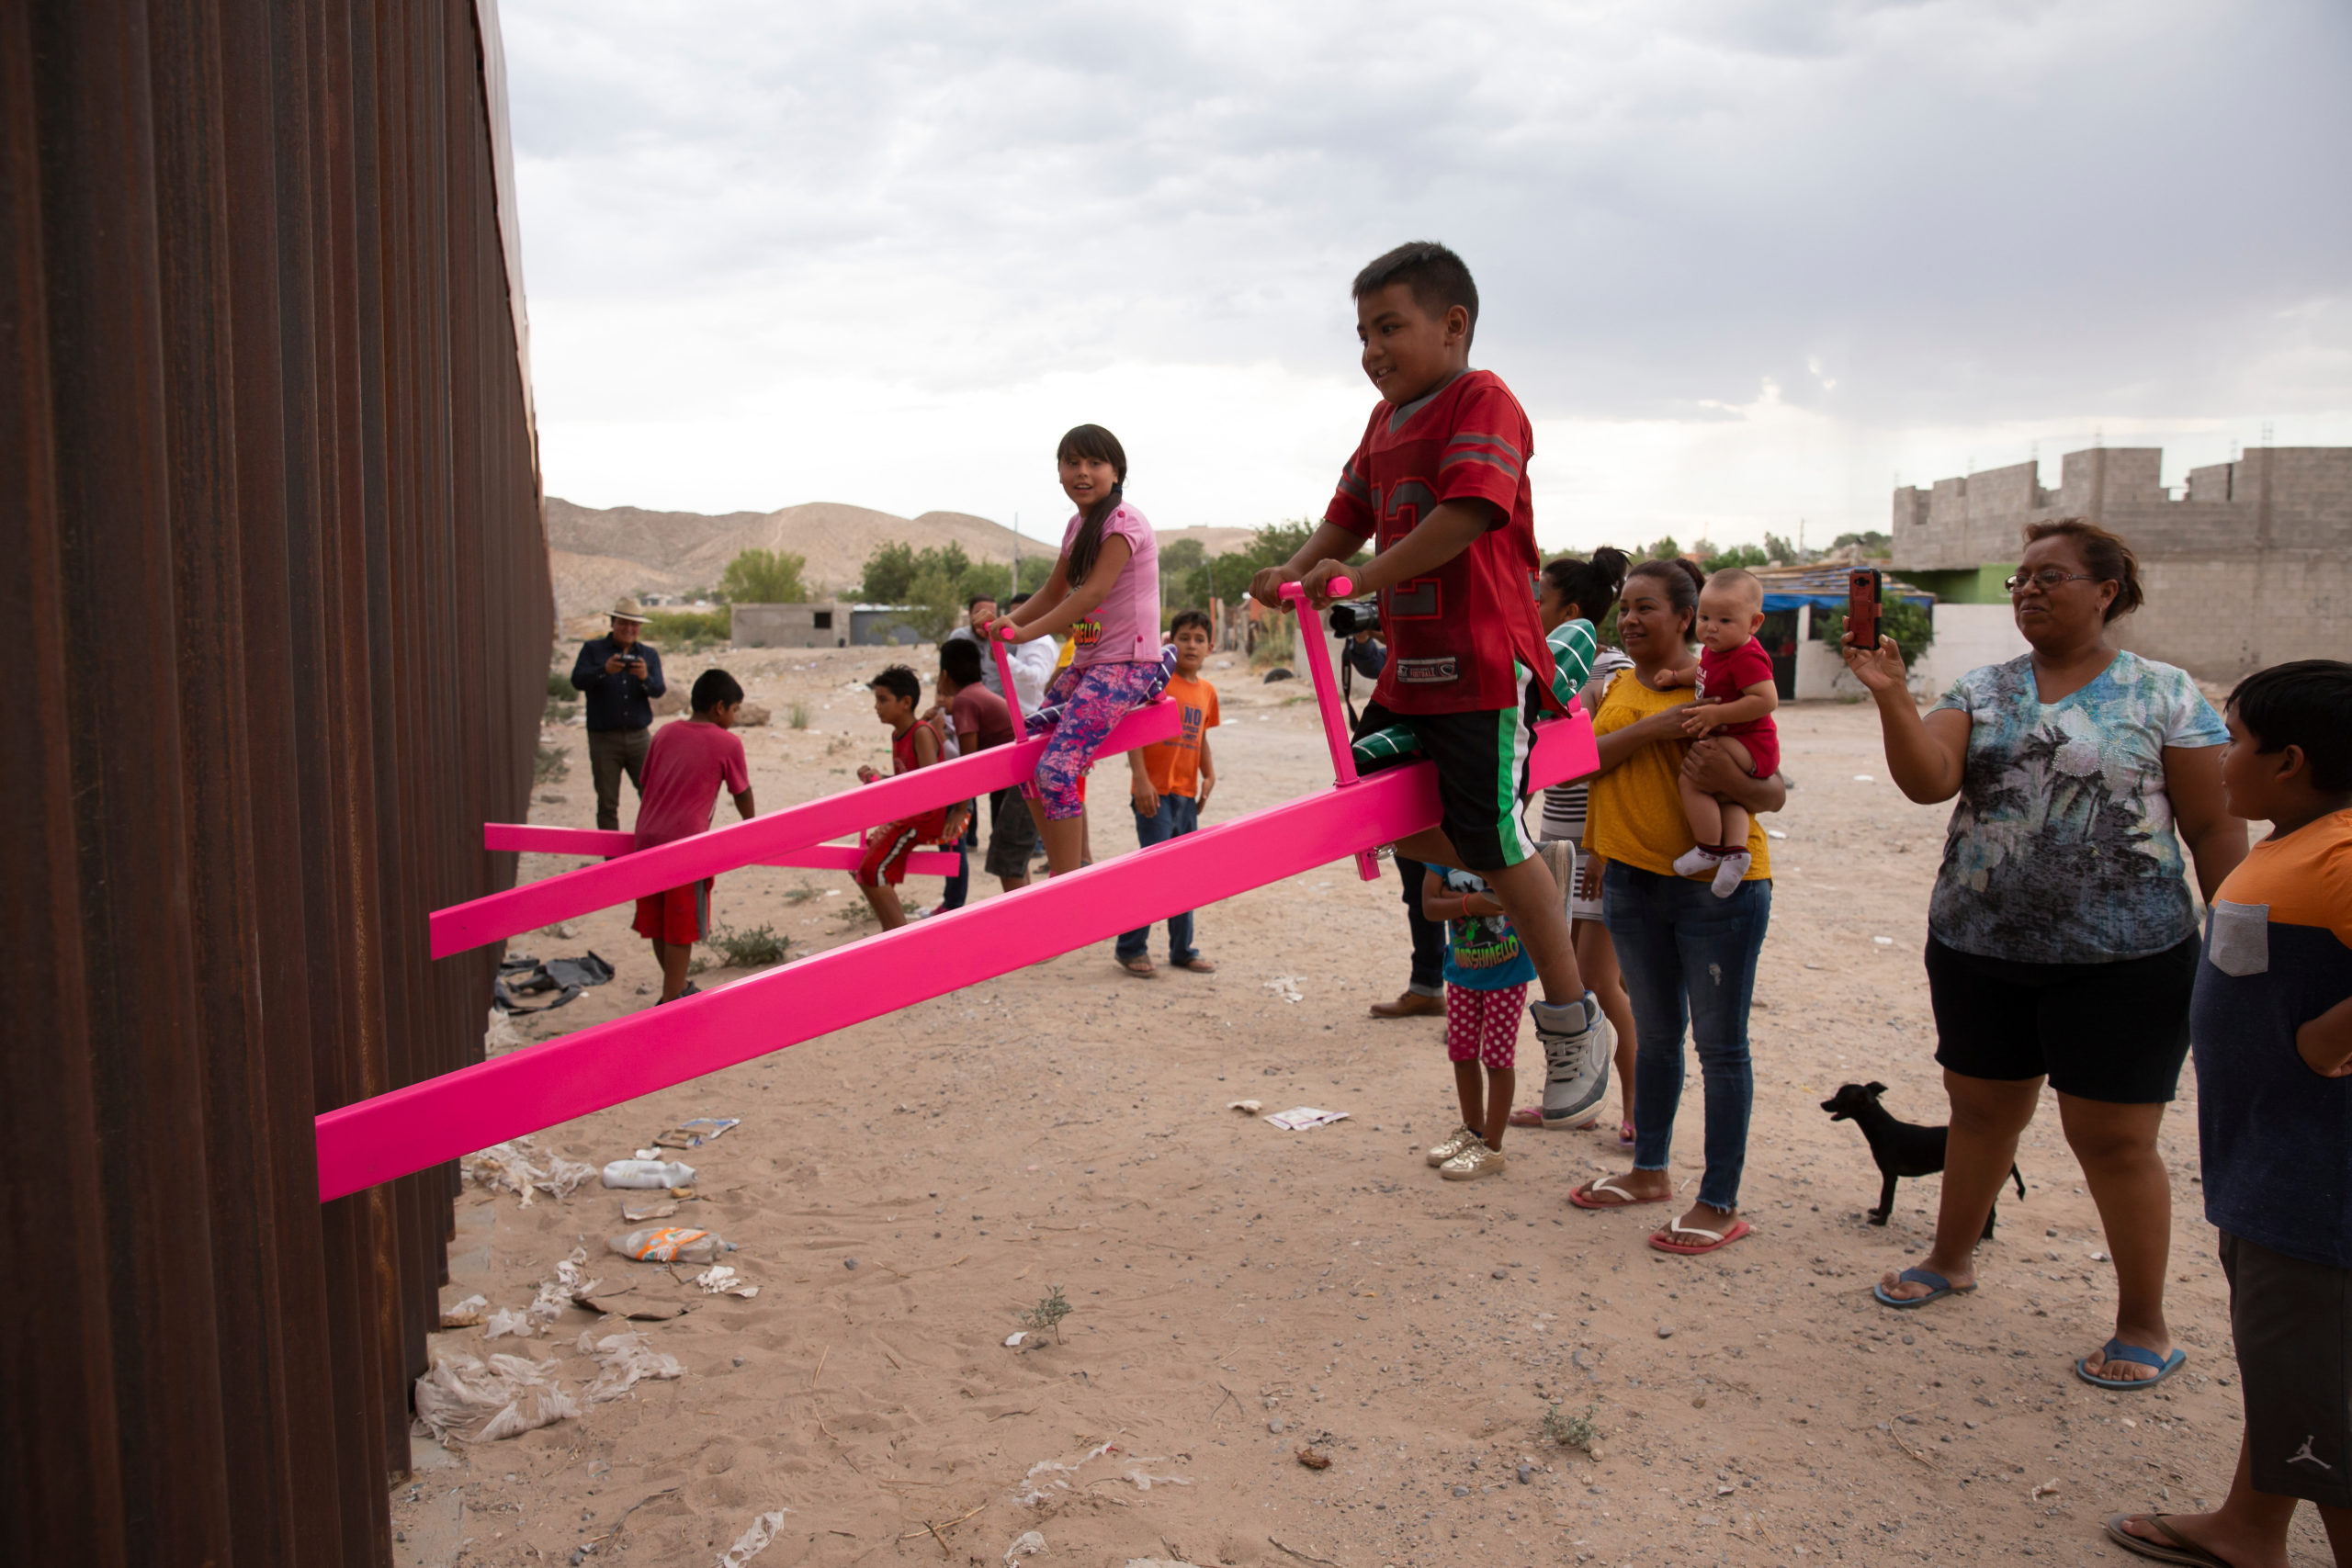 A few brown-skinned children sit and smile on hot pink teeter-totters, the other end of the teeter-totters not visible beyond the tall metal fence that they run through.